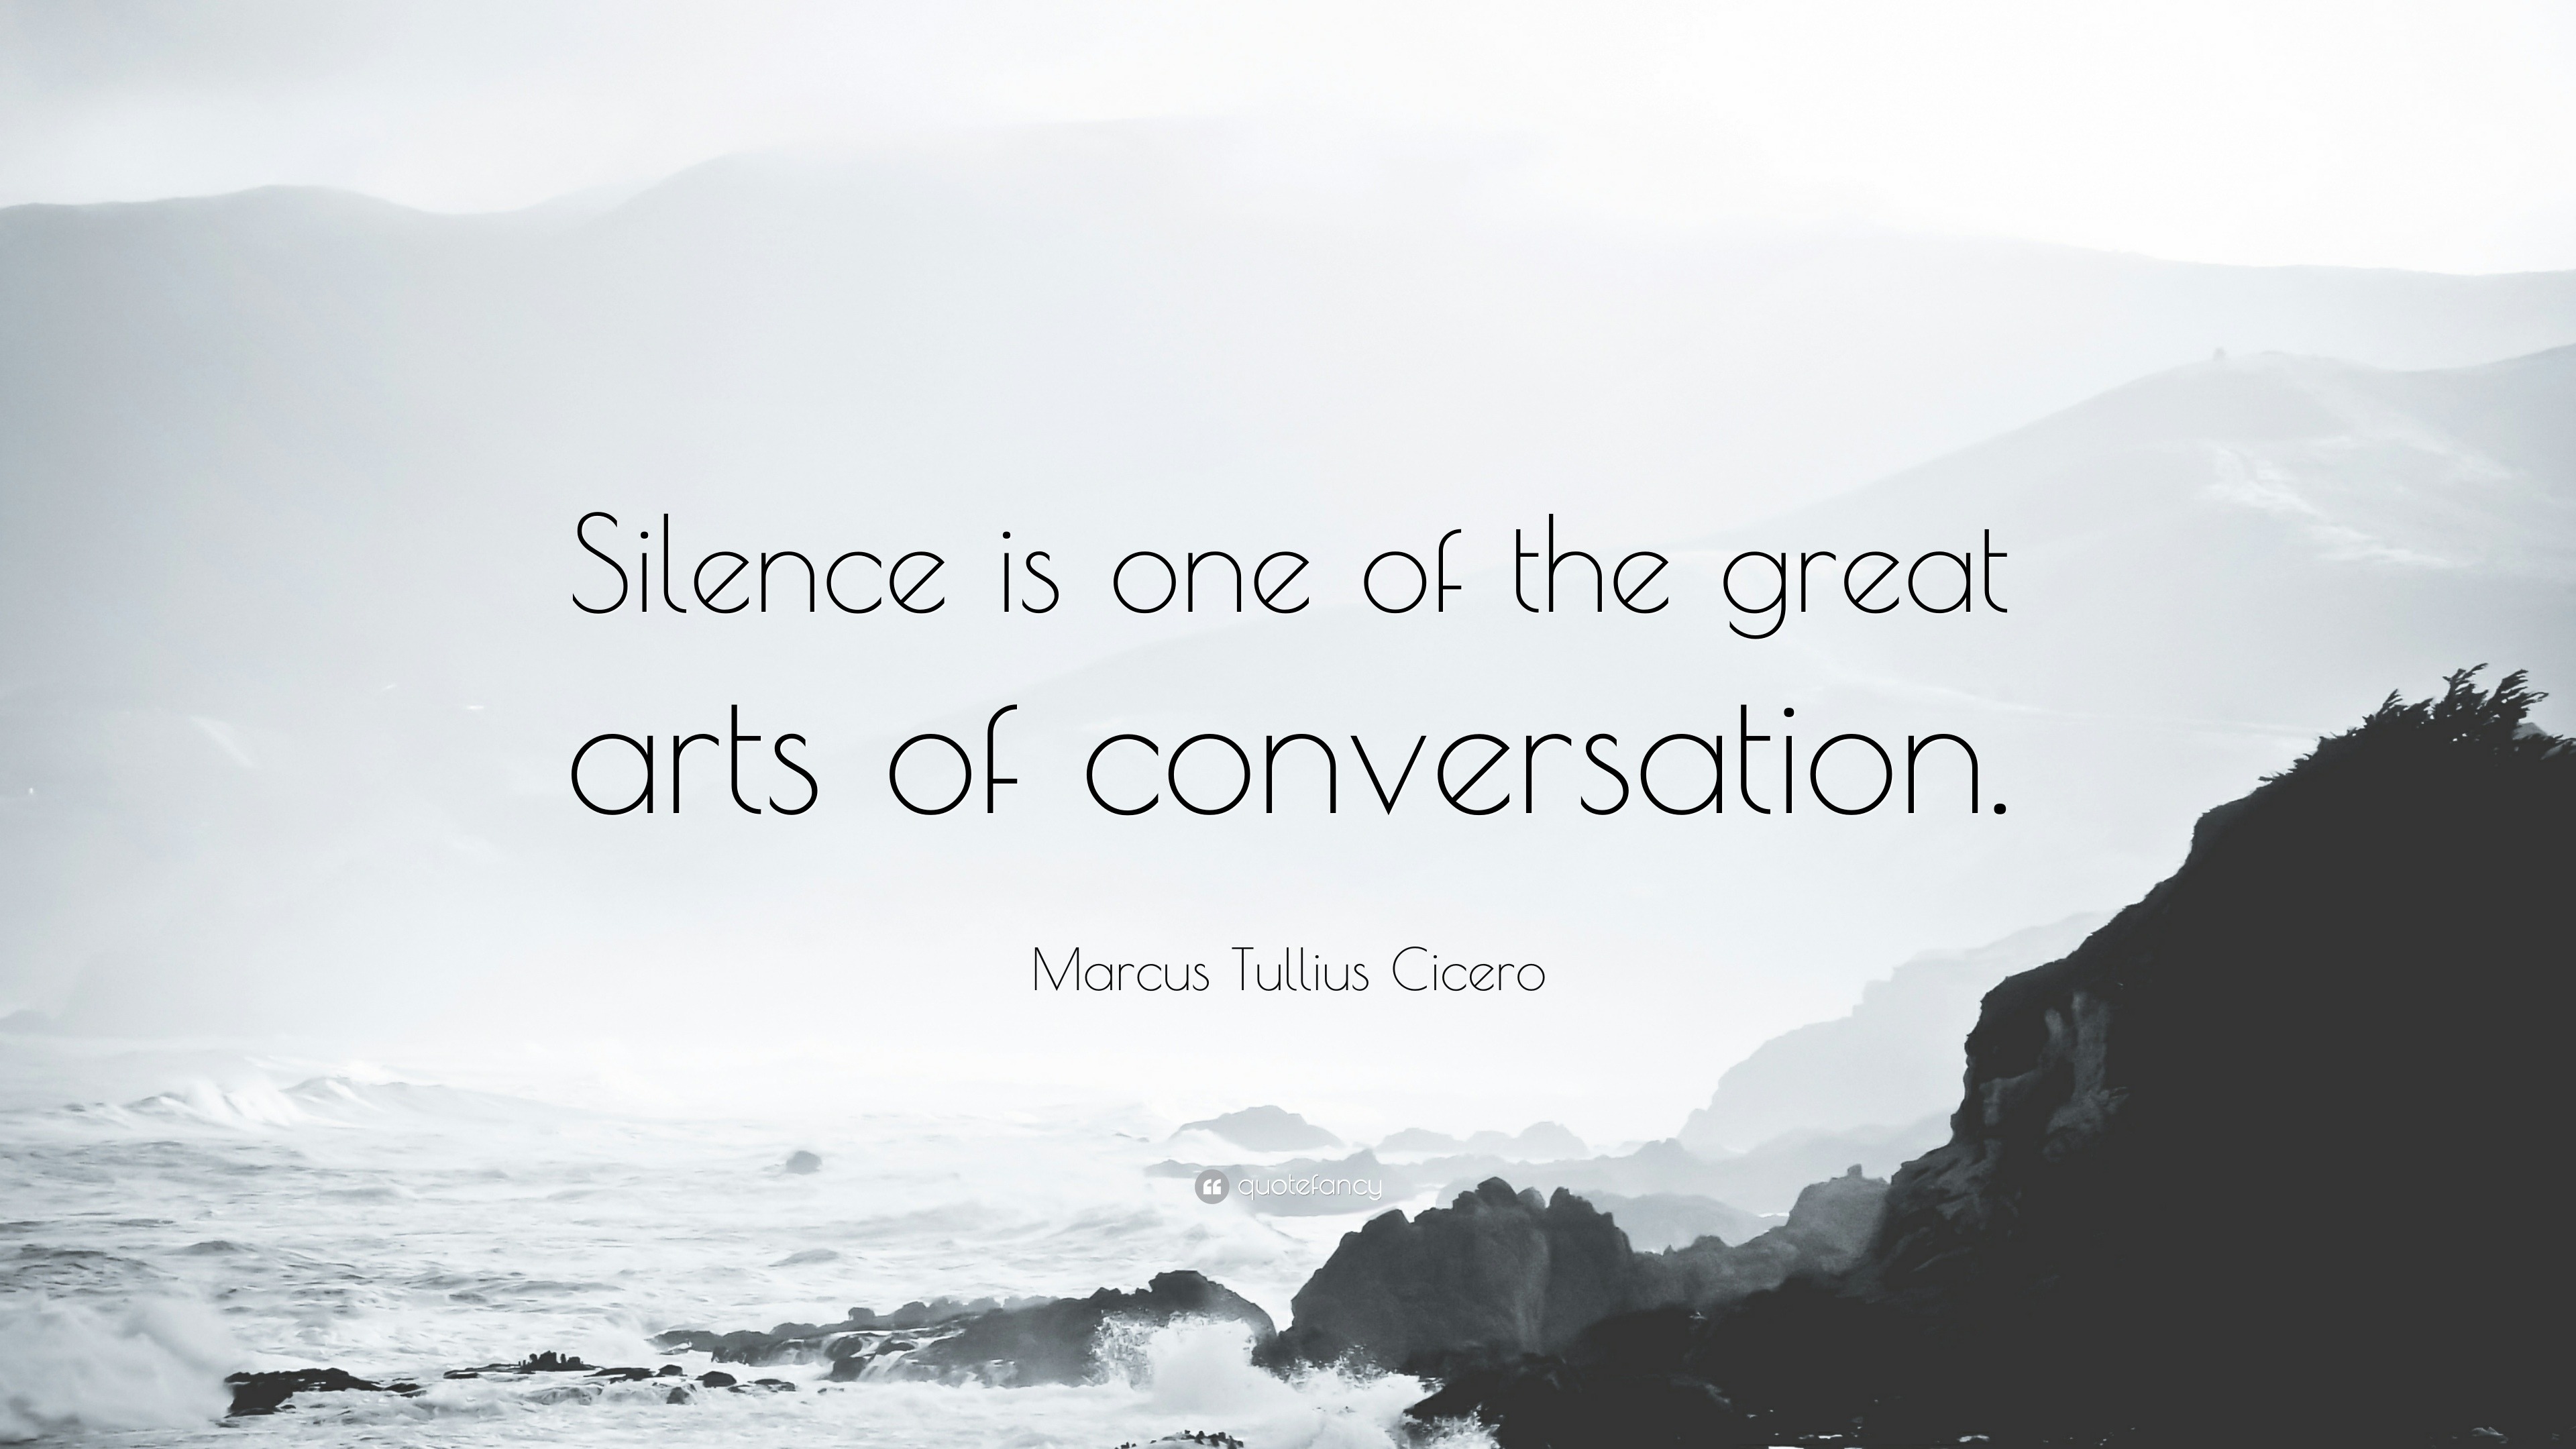 Silence Quotes (40 wallpapers) - Quotefancy